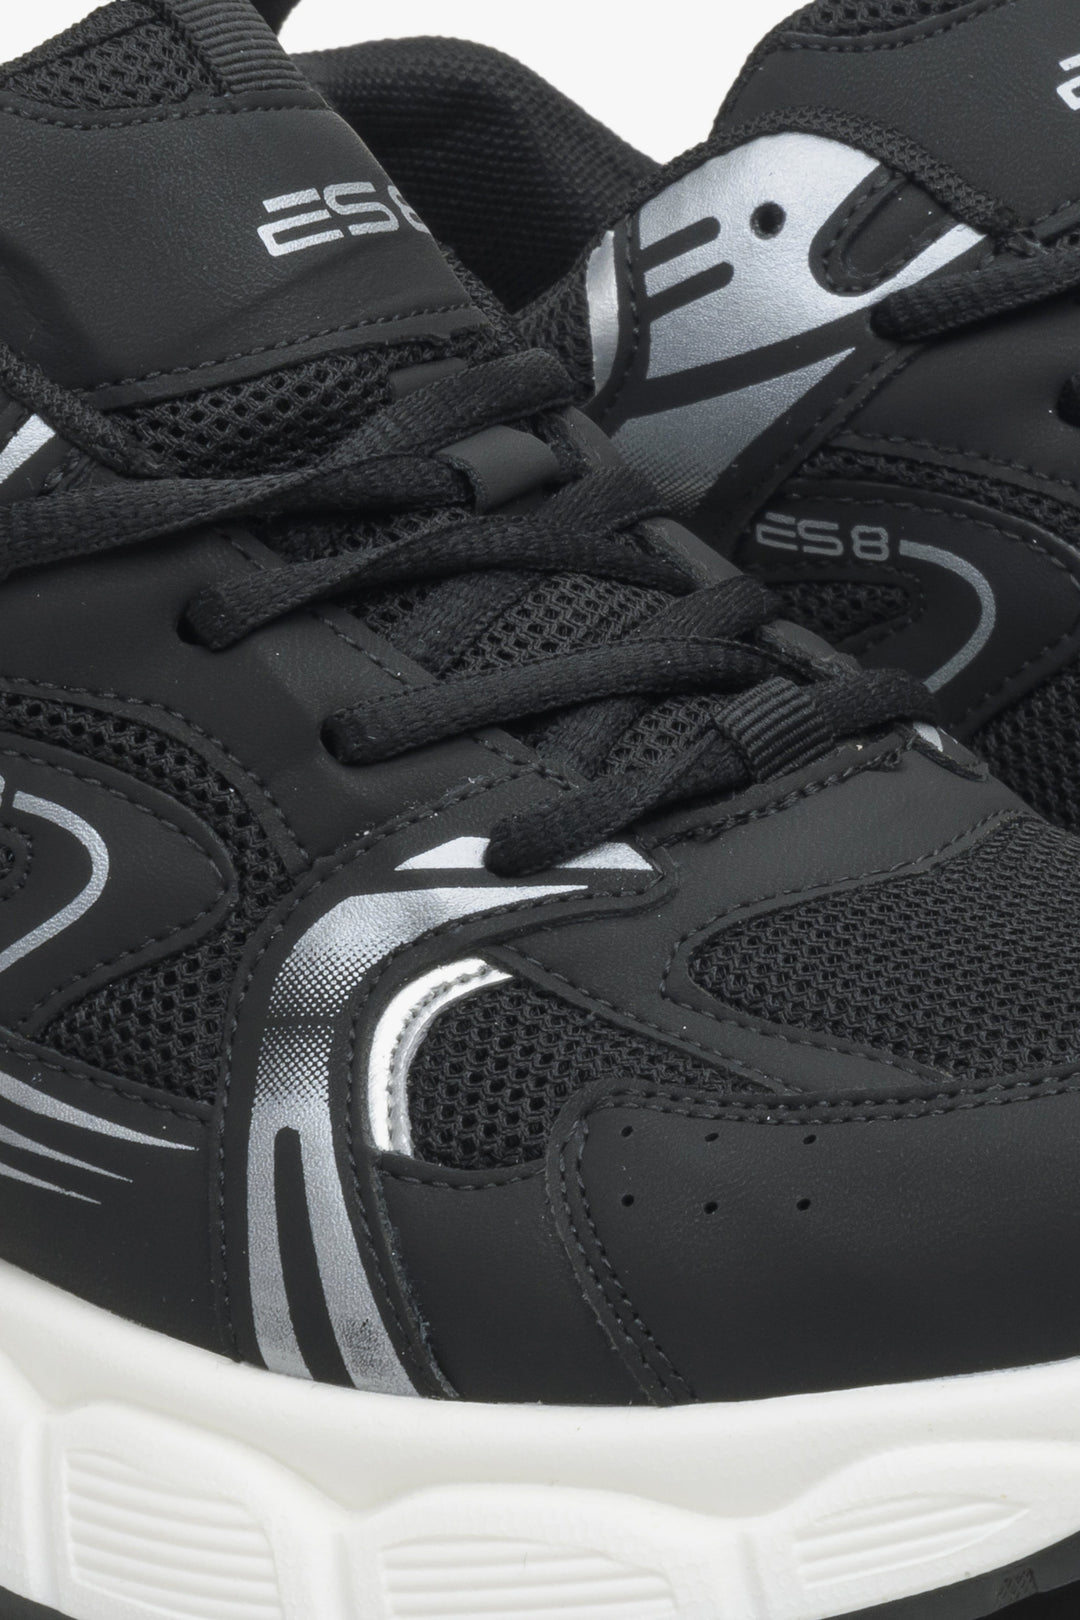 Women's black sneakers with silver details ES 8 - close-up on the seam line.